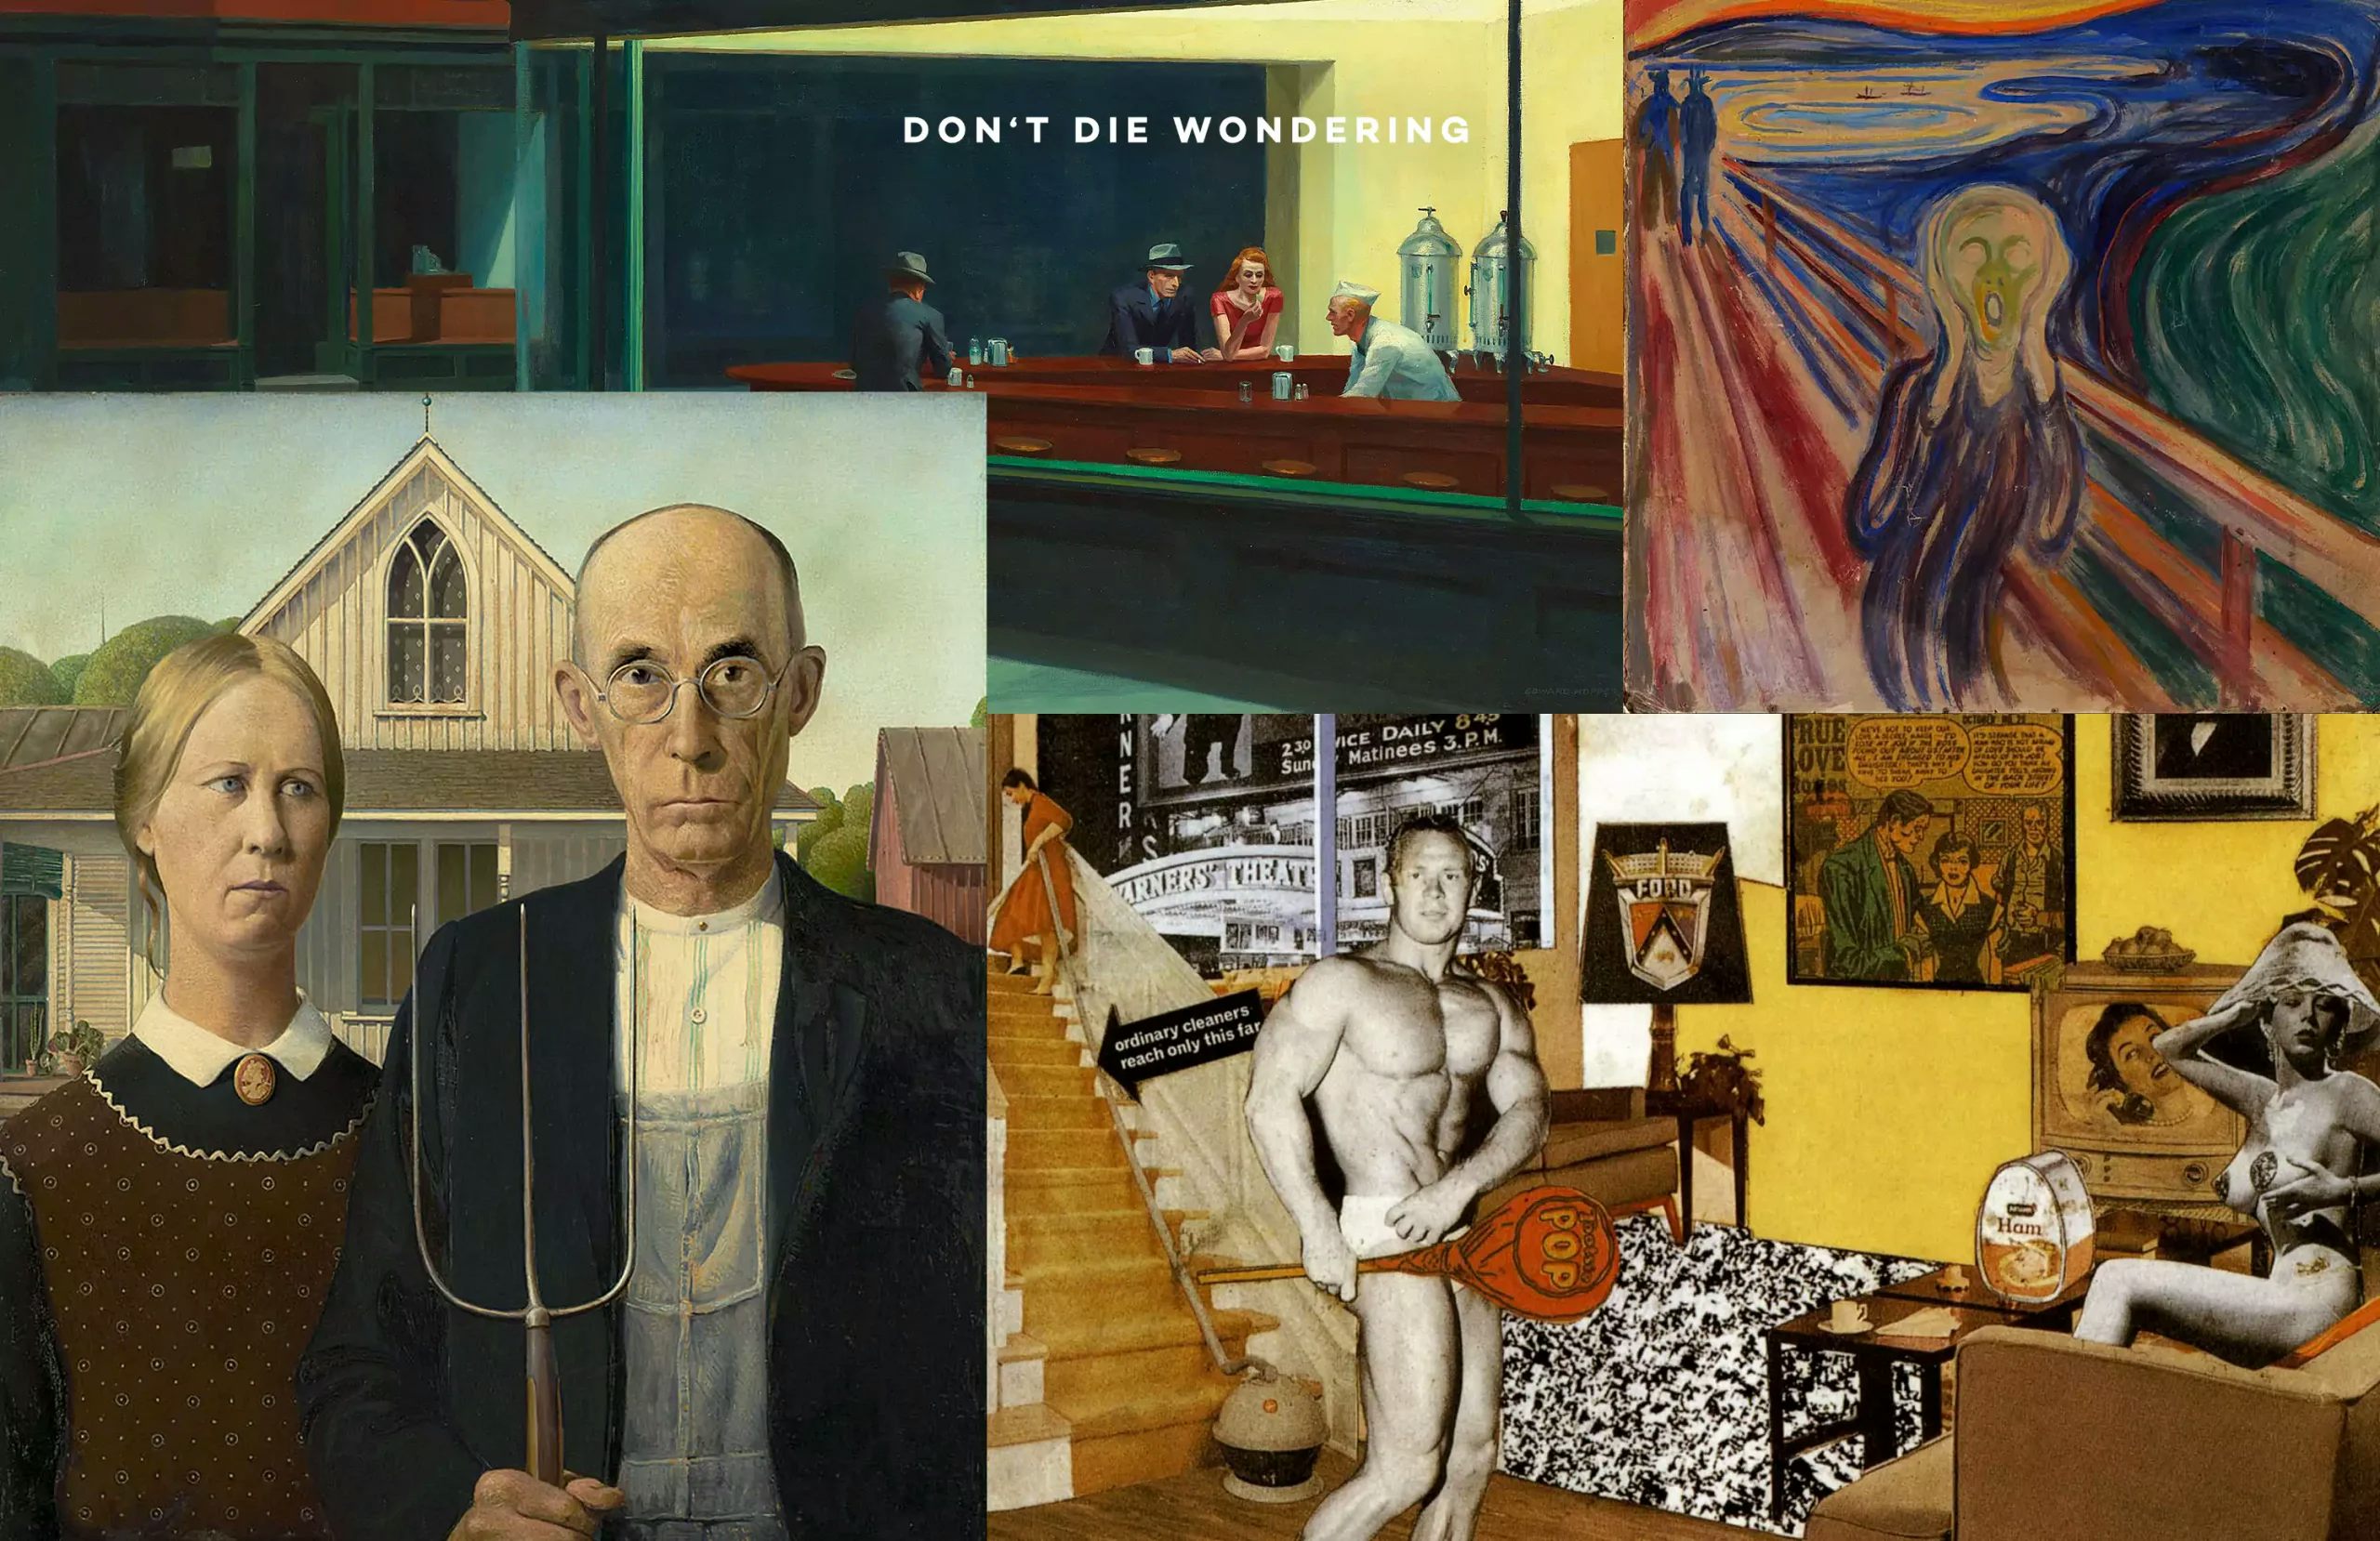 Who Are Considered The One-Hit Wonders Of The Art World?